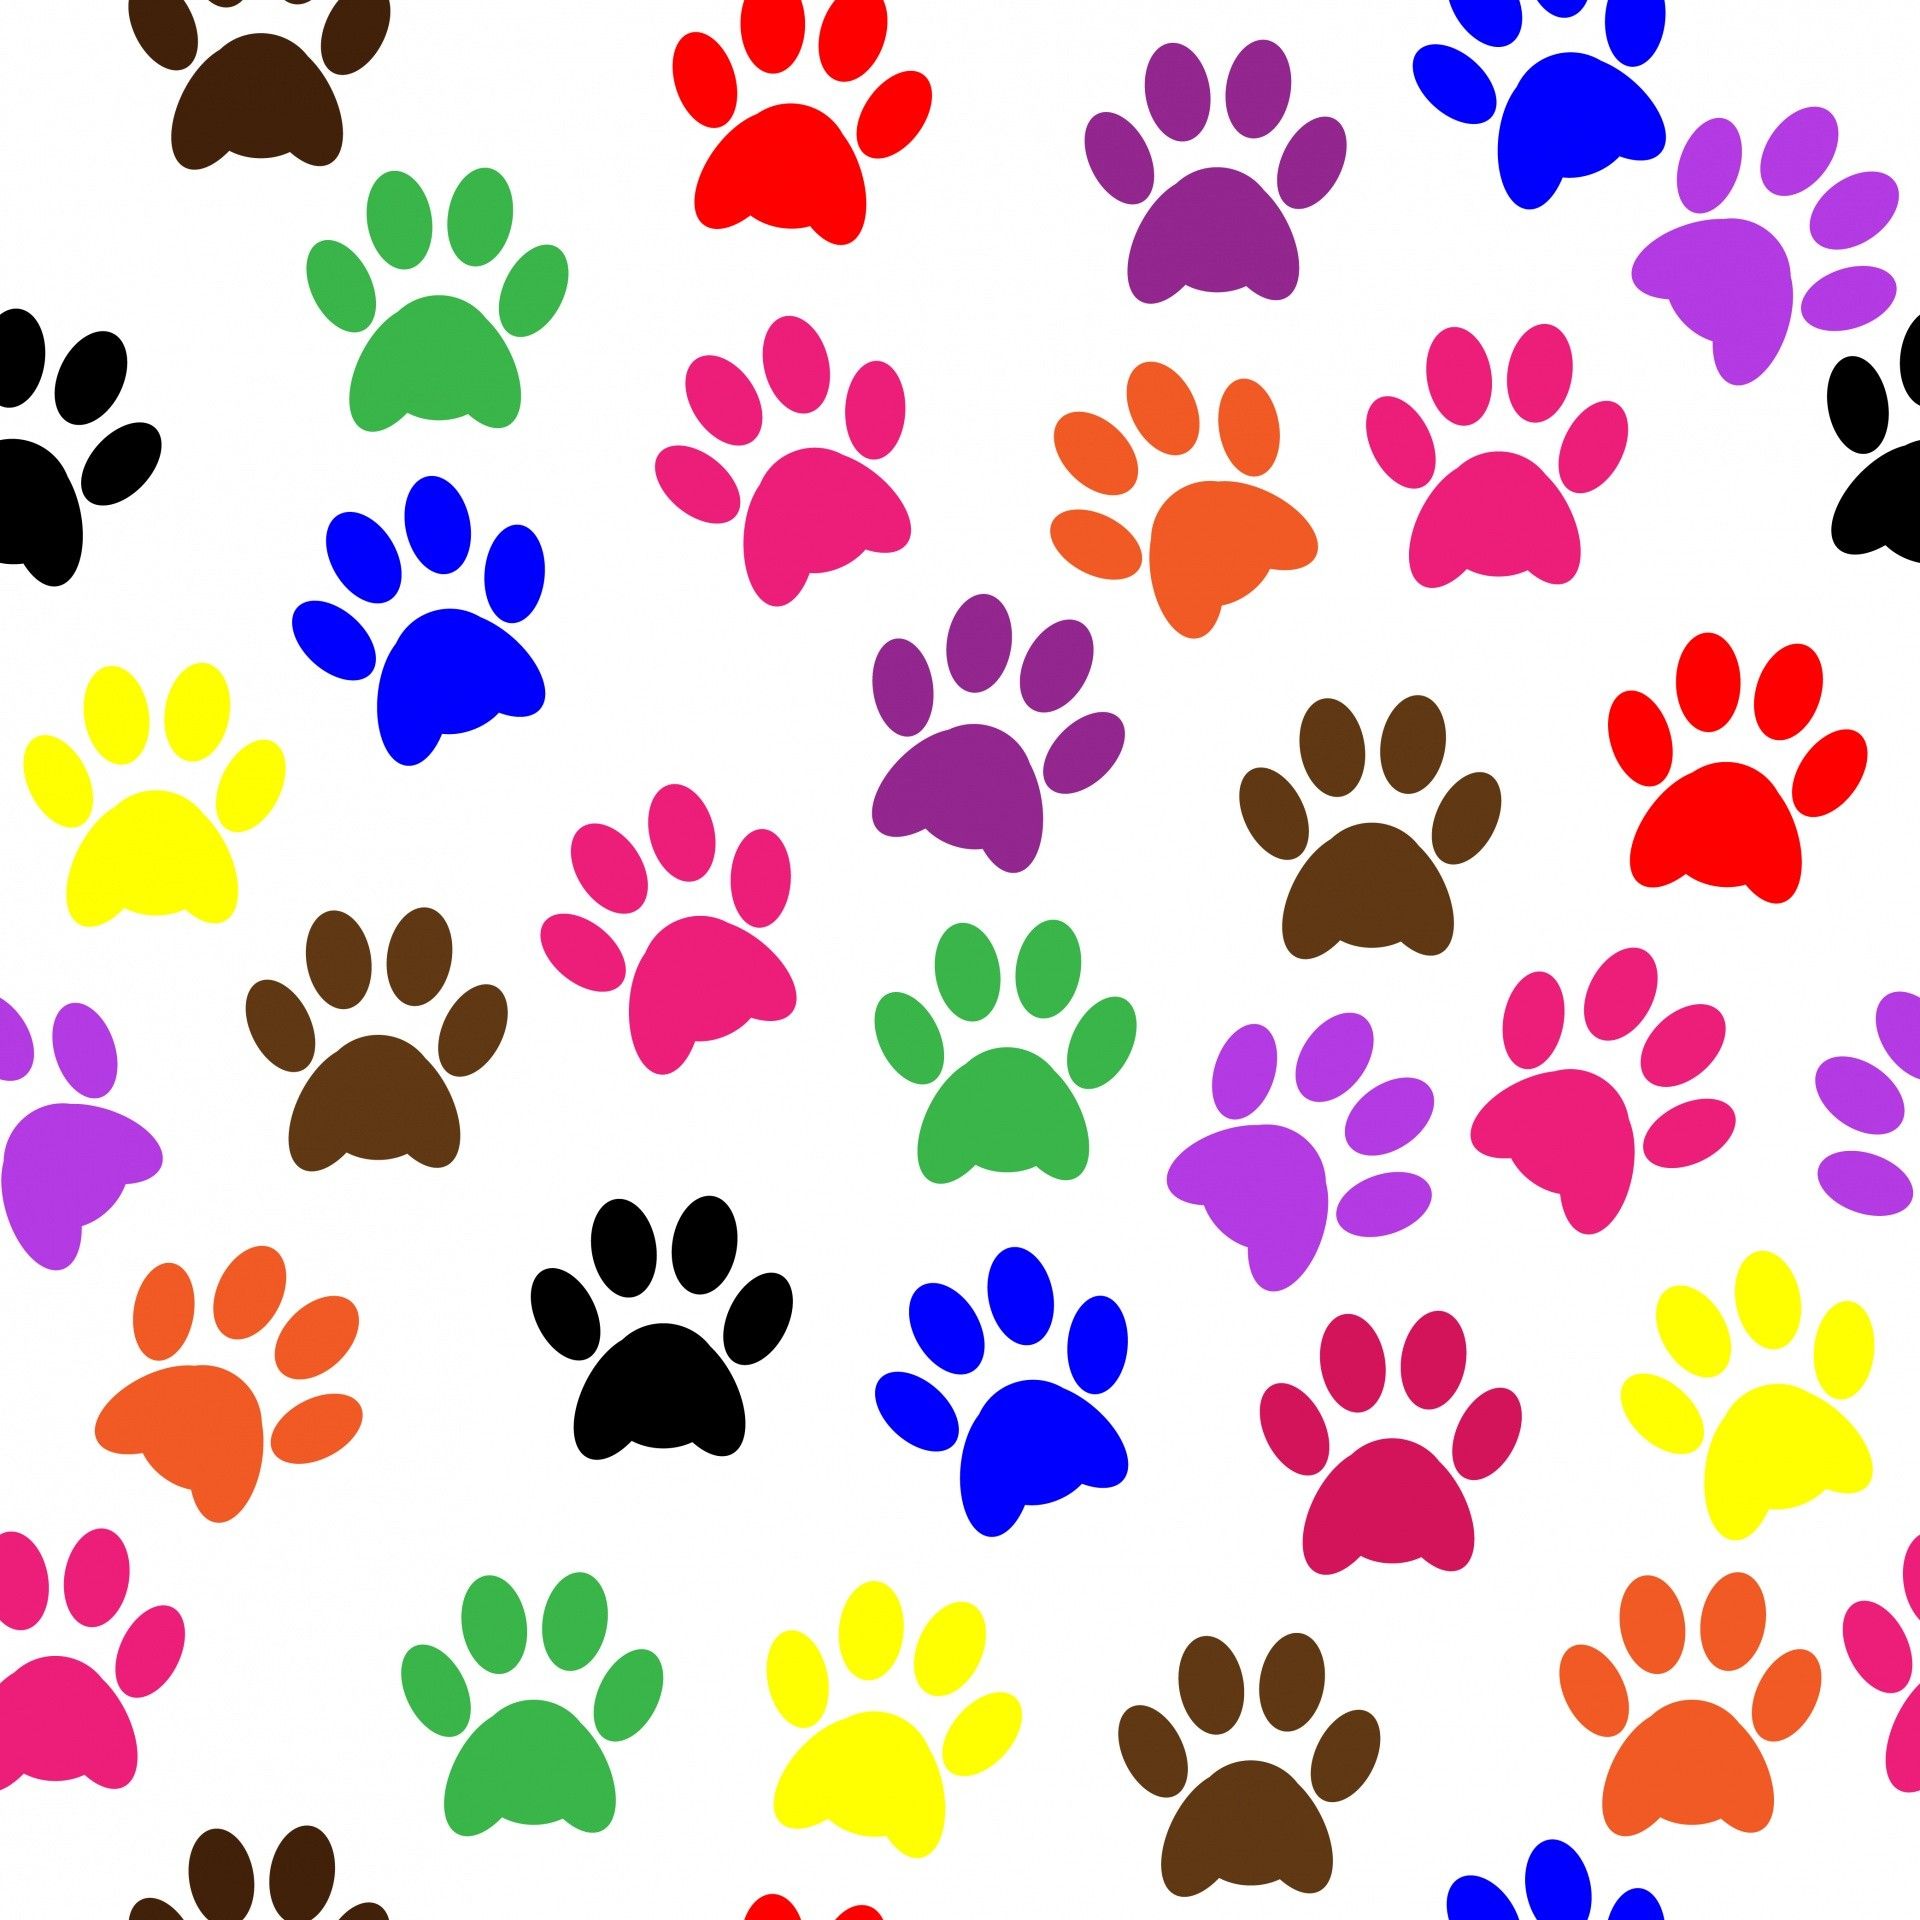 Colorful Dog Wallpaper